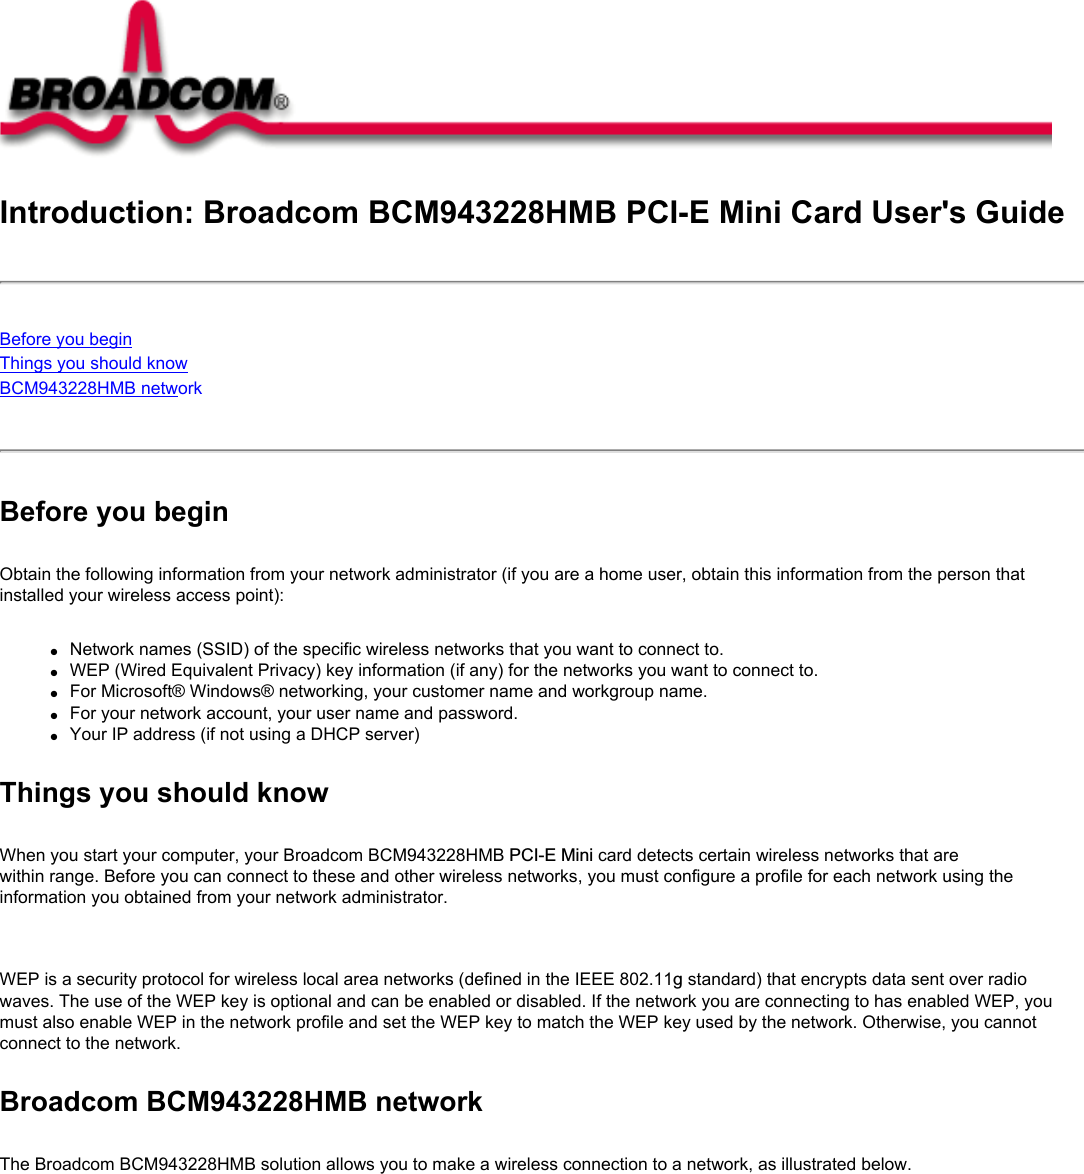 Introduction: Broadcom BCM943228HMB PCI-E Mini Card User&apos;s GuideBefore you beginThings you should knowBCM943228HMB network Before you beginObtain the following information from your network administrator (if you are a home user, obtain this information from the person that installed your wireless access point):●     Network names (SSID) of the specific wireless networks that you want to connect to.●     WEP (Wired Equivalent Privacy) key information (if any) for the networks you want to connect to.●     For Microsoft® Windows® networking, your customer name and workgroup name.●     For your network account, your user name and password.●     Your IP address (if not using a DHCP server)Things you should knowWhen you start your computer, your Broadcom BCM943228HMB PCI-E Mini card detects certain wireless networks that are within range. Before you can connect to these and other wireless networks, you must configure a profile for each network using the information you obtained from your network administrator.   WEP is a security protocol for wireless local area networks (defined in the IEEE 802.11g standard) that encrypts data sent over radio waves. The use of the WEP key is optional and can be enabled or disabled. If the network you are connecting to has enabled WEP, you must also enable WEP in the network profile and set the WEP key to match the WEP key used by the network. Otherwise, you cannot connect to the network.Broadcom BCM943228HMB networkThe Broadcom BCM943228HMB solution allows you to make a wireless connection to a network, as illustrated below.